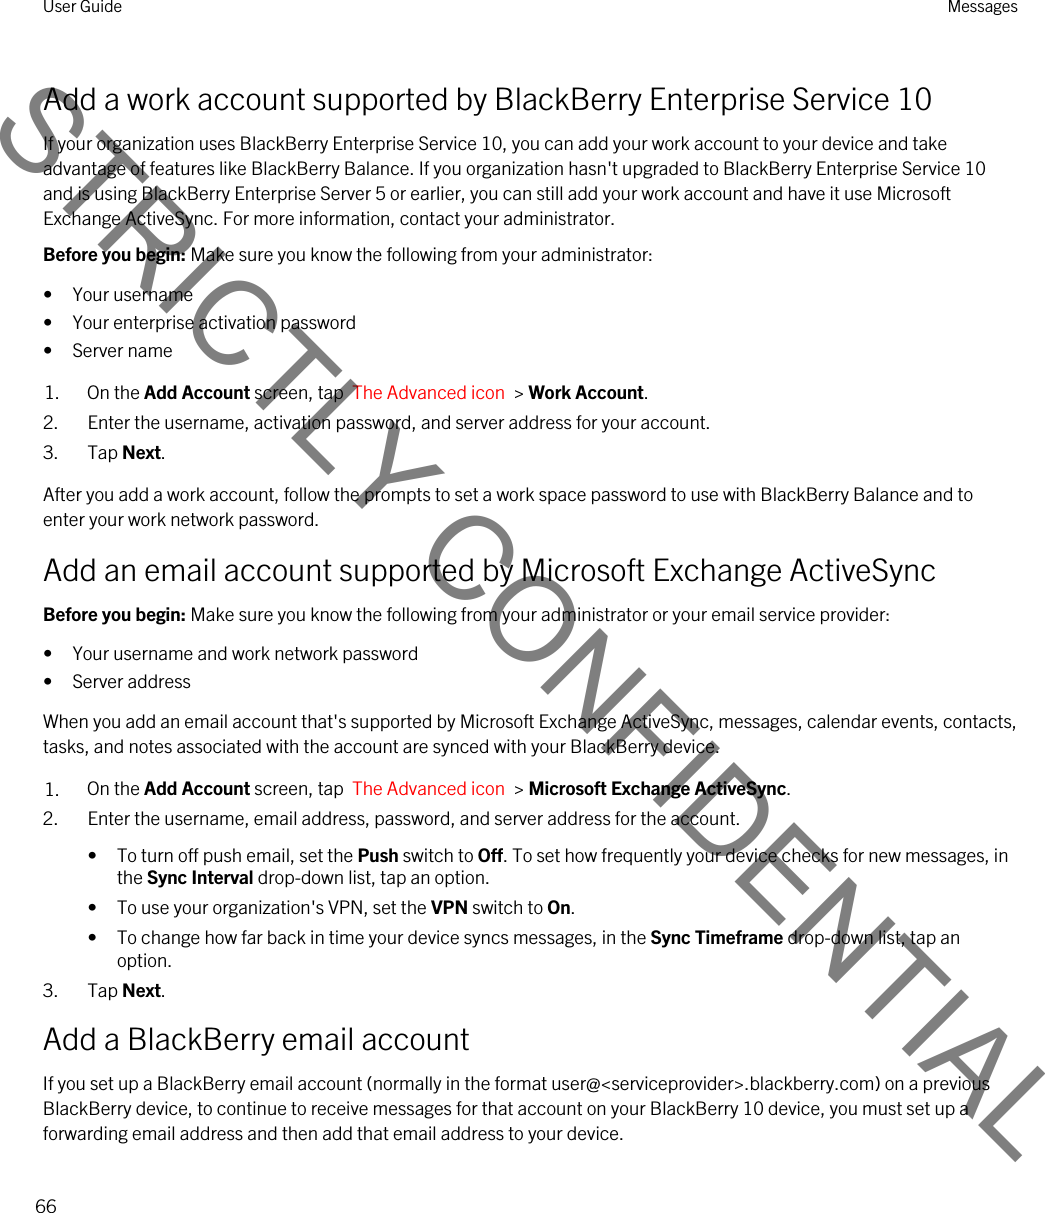 Add a work account supported by BlackBerry Enterprise Service 10If your organization uses BlackBerry Enterprise Service 10, you can add your work account to your device and take advantage of features like BlackBerry Balance. If you organization hasn&apos;t upgraded to BlackBerry Enterprise Service 10 and is using BlackBerry Enterprise Server 5 or earlier, you can still add your work account and have it use Microsoft Exchange ActiveSync. For more information, contact your administrator.Before you begin: Make sure you know the following from your administrator:• Your username• Your enterprise activation password• Server name1. On the Add Account screen, tap  The Advanced icon  &gt; Work Account.2. Enter the username, activation password, and server address for your account.3. Tap Next.After you add a work account, follow the prompts to set a work space password to use with BlackBerry Balance and to enter your work network password.Add an email account supported by Microsoft Exchange ActiveSyncBefore you begin: Make sure you know the following from your administrator or your email service provider:• Your username and work network password• Server addressWhen you add an email account that&apos;s supported by Microsoft Exchange ActiveSync, messages, calendar events, contacts, tasks, and notes associated with the account are synced with your BlackBerry device.1. On the Add Account screen, tap  The Advanced icon  &gt; Microsoft Exchange ActiveSync.2. Enter the username, email address, password, and server address for the account.• To turn off push email, set the Push switch to Off. To set how frequently your device checks for new messages, in the Sync Interval drop-down list, tap an option.• To use your organization&apos;s VPN, set the VPN switch to On.• To change how far back in time your device syncs messages, in the Sync Timeframe drop-down list, tap an option.3. Tap Next.Add a BlackBerry email accountIf you set up a BlackBerry email account (normally in the format user@&lt;serviceprovider&gt;.blackberry.com) on a previous BlackBerry device, to continue to receive messages for that account on your BlackBerry 10 device, you must set up a forwarding email address and then add that email address to your device.User Guide Messages66STRICTLY CONFIDENTIAL